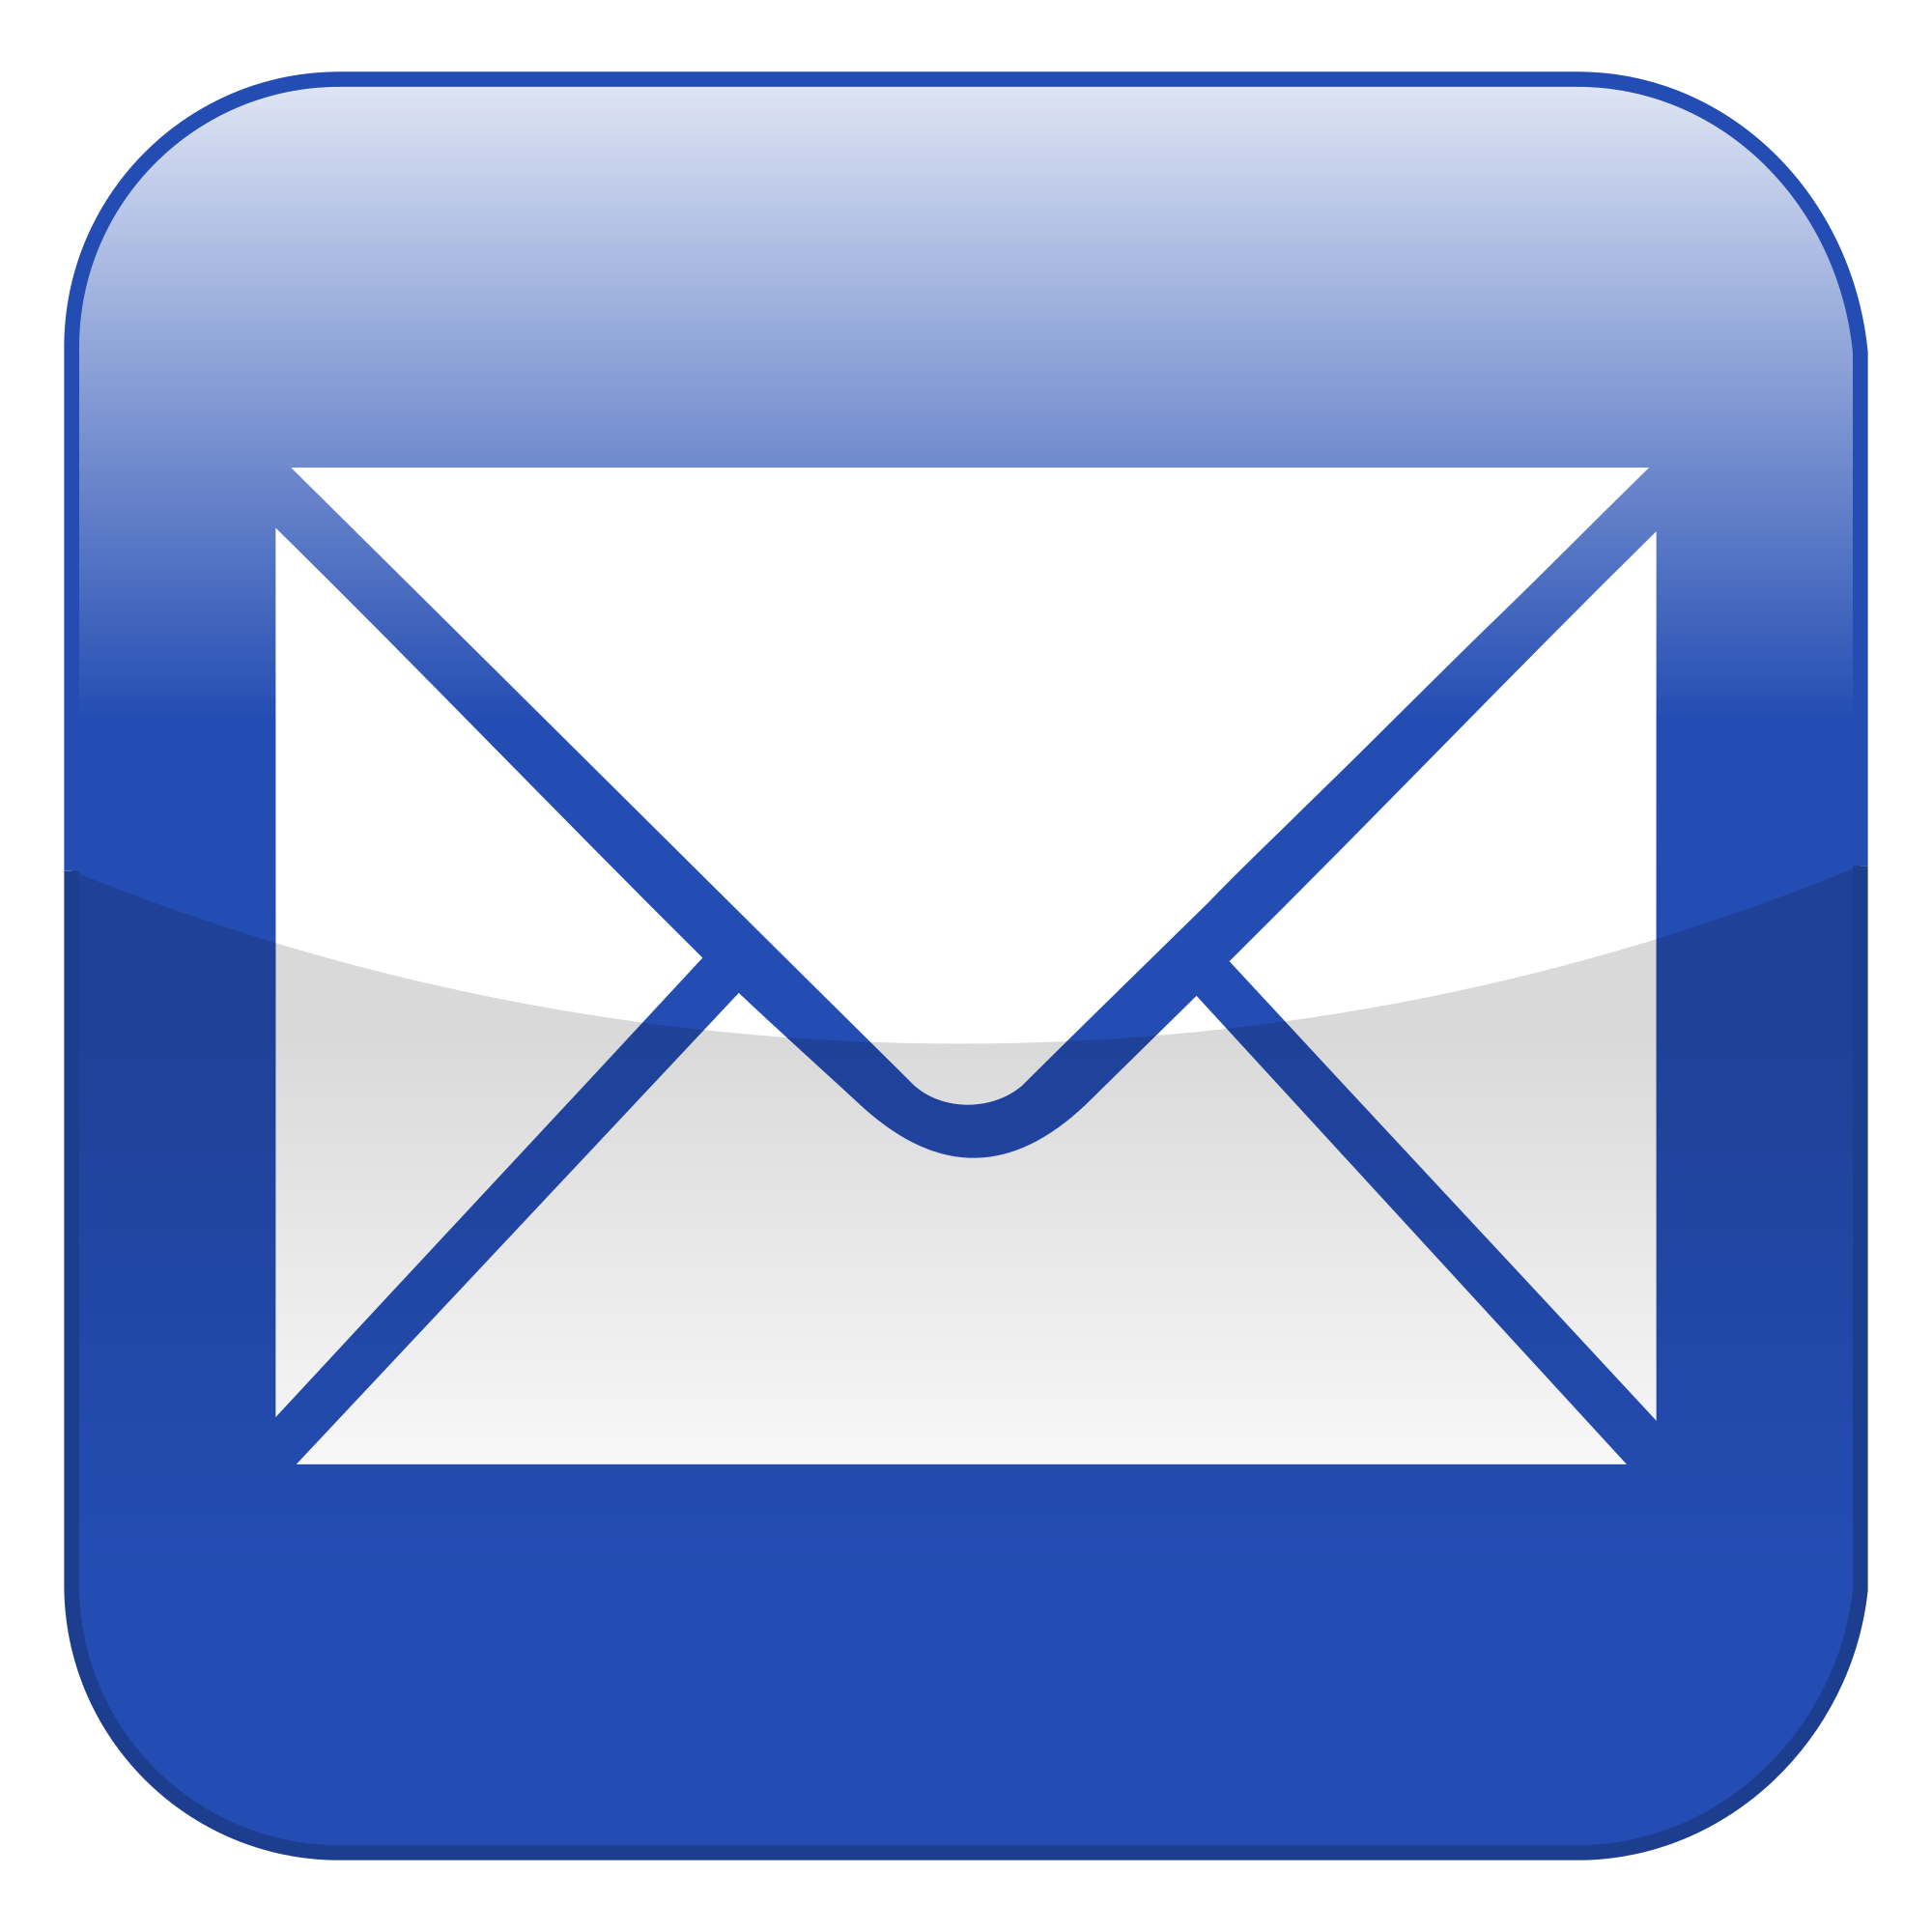 2000px-Email_Shiny_Icon.svg.